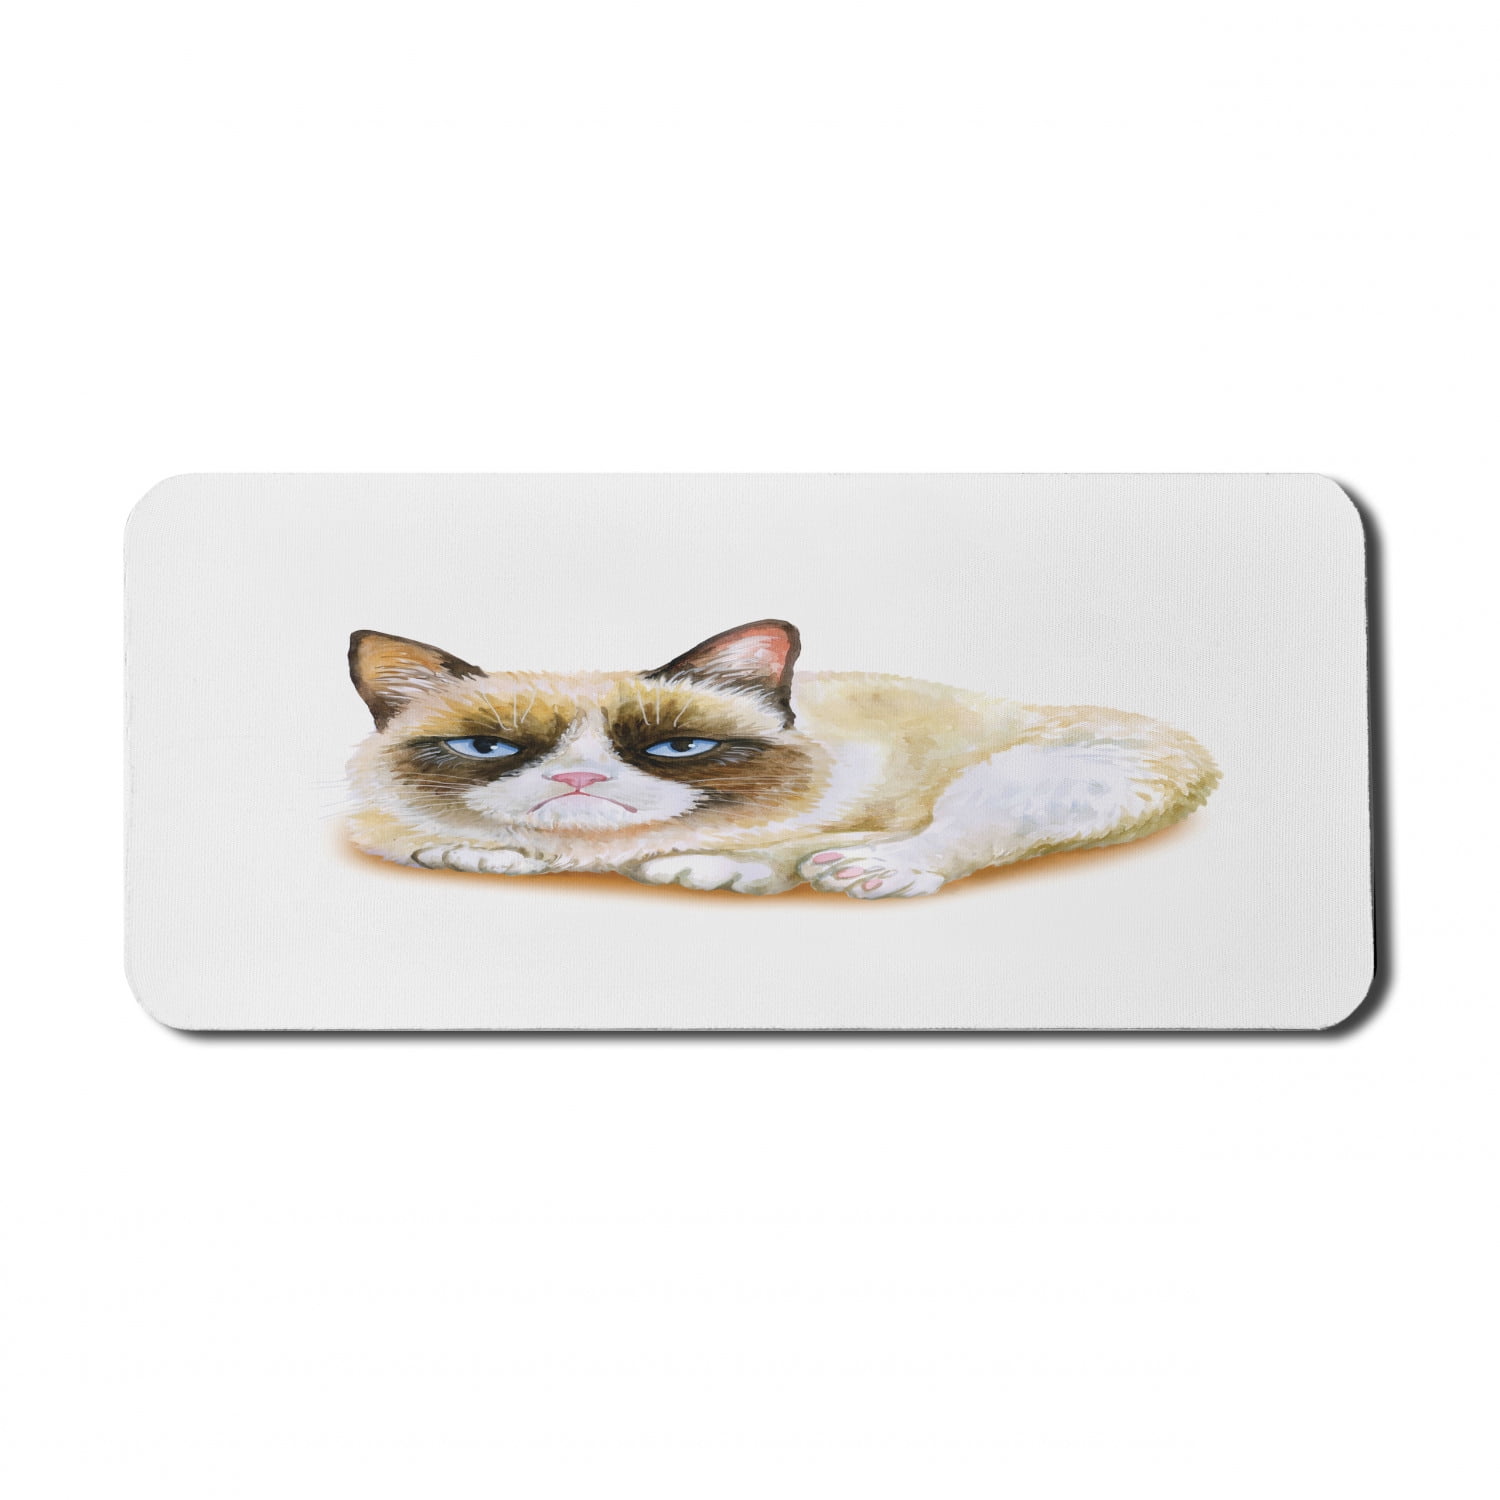 Keyboards, Mice & Accessories Electronics Funny Cat Lying on a ...